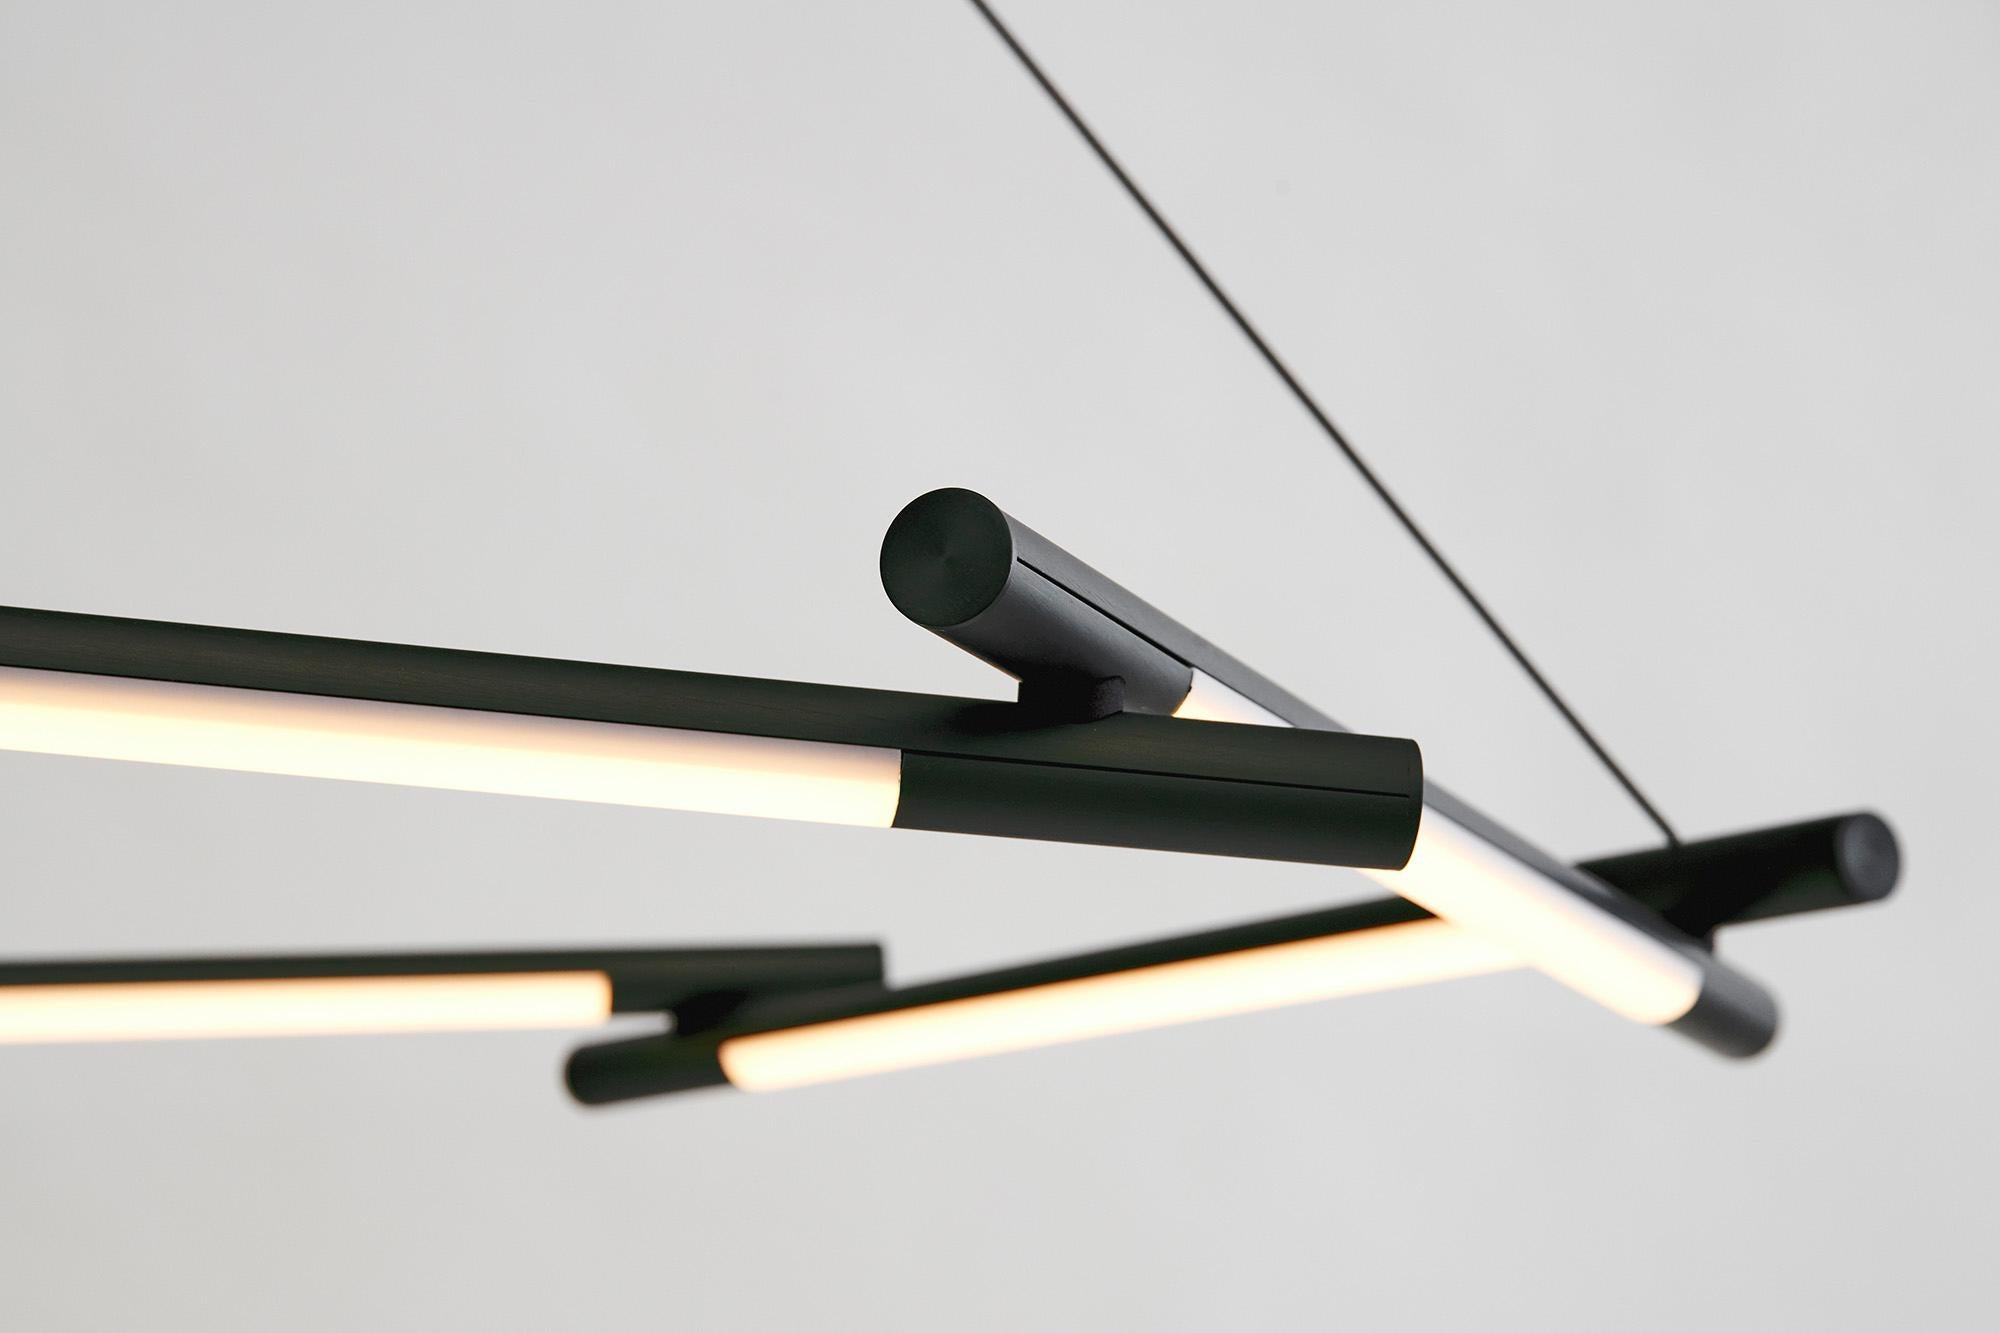 An angular, industrial take on a classic luxury object. A centrepiece to illuminate and elevate any space.
The core design is a set of interlocking extruded aluminium profiles. The dimmable LED source can provide either functional or ambient